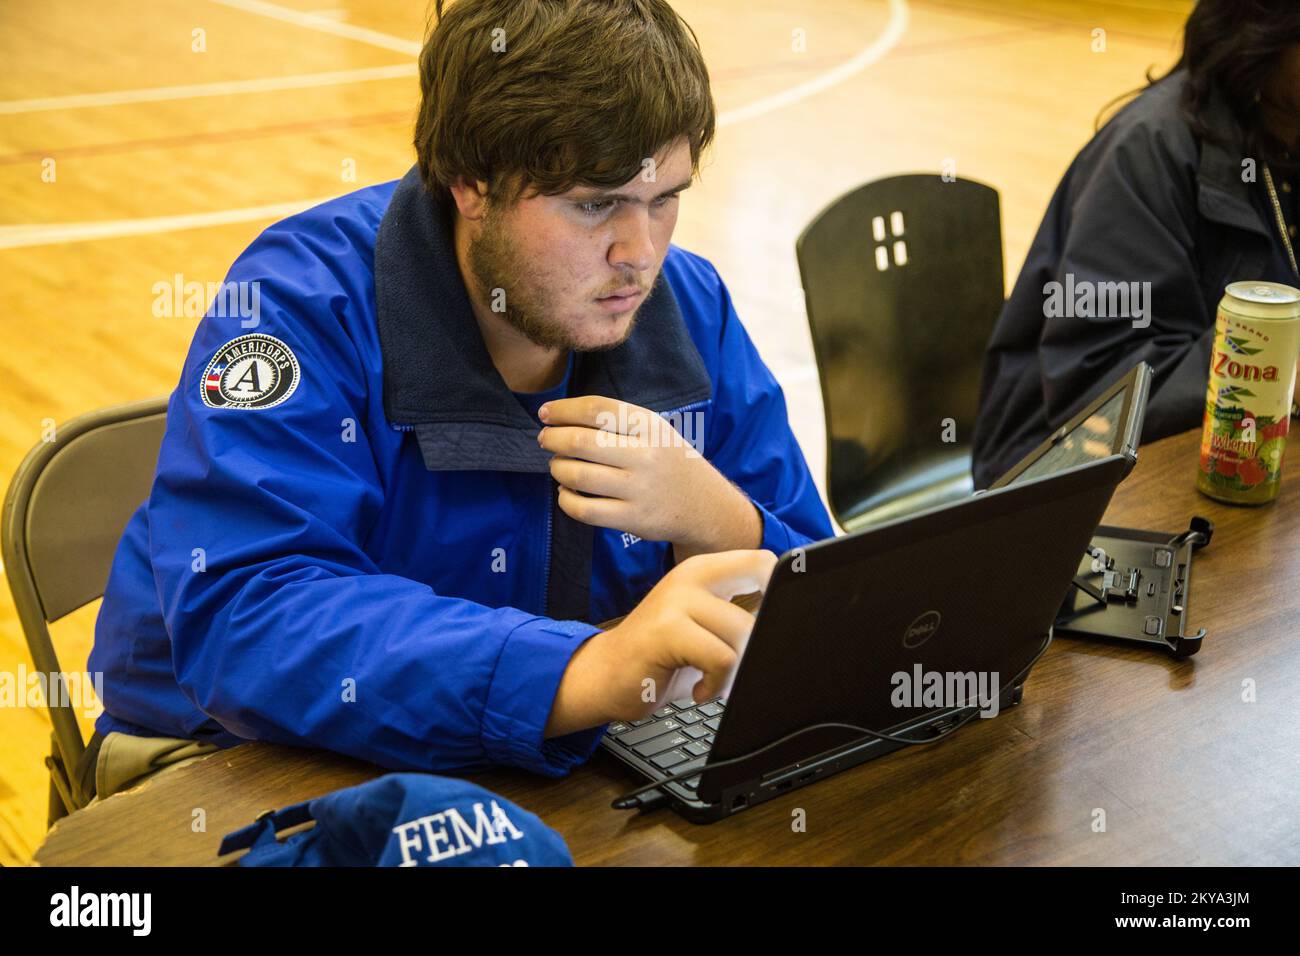 Highland Park, MI, October 4, 2014 - Forrest Evans, FEMA Corps Spruce 2 DSA Specialist, checks his computer as he assists disaster survivor Jolita Cotton at a Recovery Support Site (RSS) in the gymnasium of the Detroit Rescue Mission Community Center in Highland Park, Michigan after the Detroit metropolitan counties of Oakland, Wayne and Macomb were adversely impacted by severe storms and flooding on August 11-13, 2014. FEMA Supports local and state governments and tribal entities in their efforts to recover from natural disasters. Michigan Severe Storms and Flooding. Photographs Relating to D Stock Photo